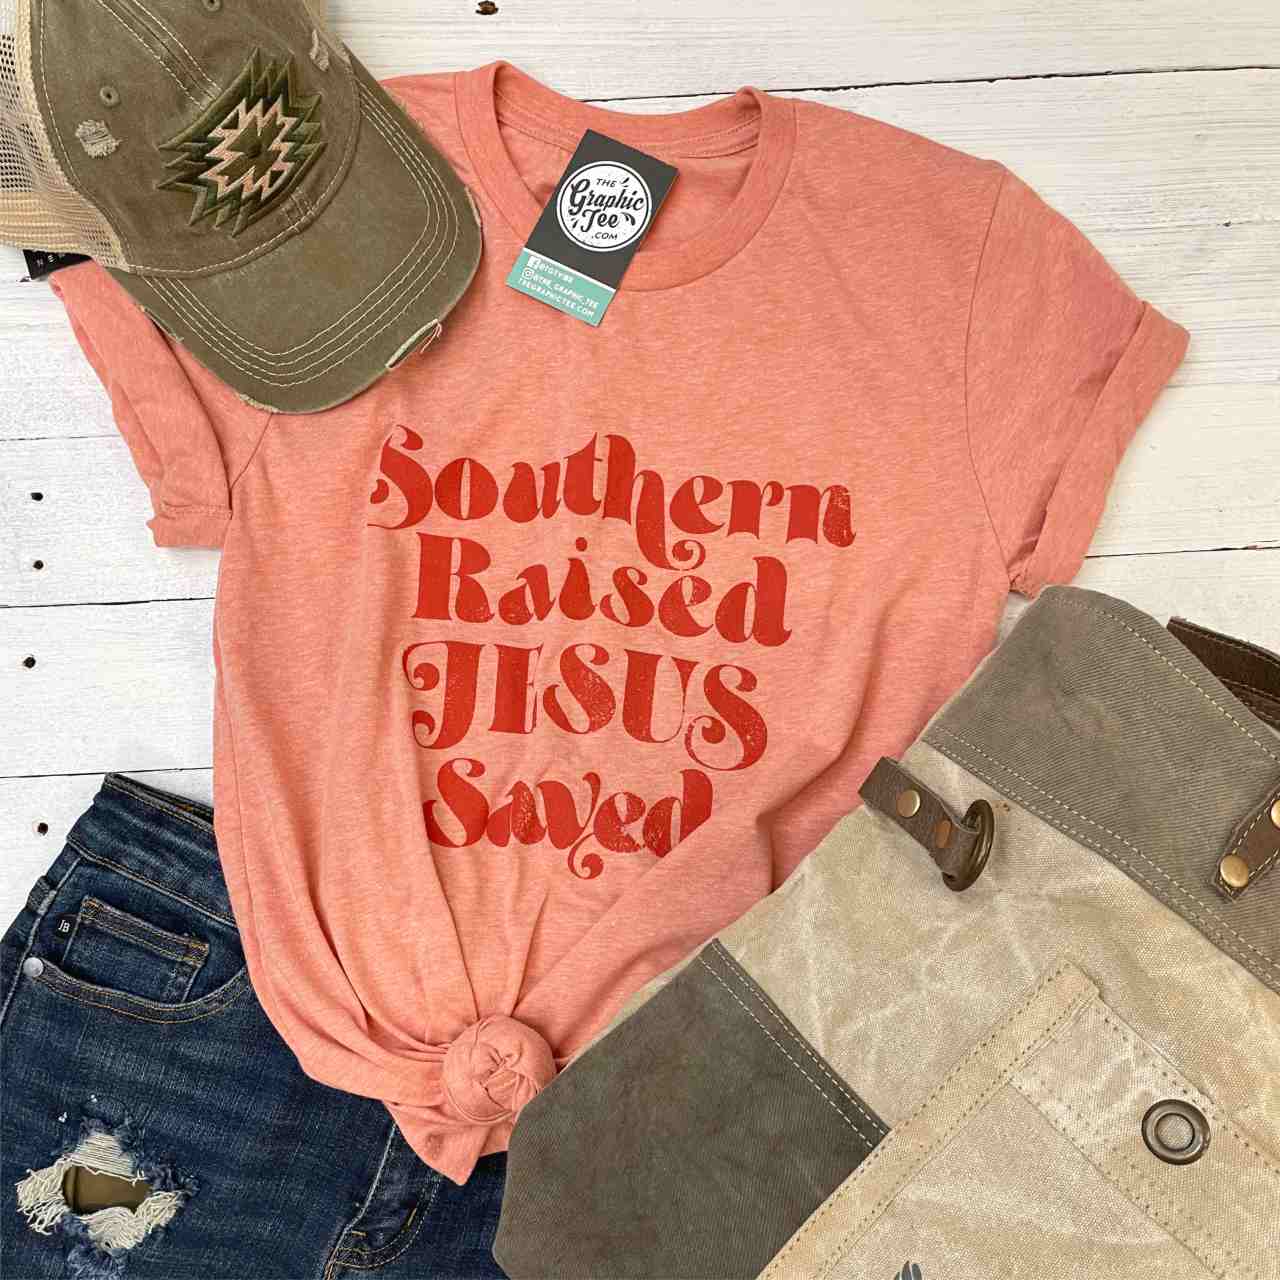 *WHOLESALE* Southern Raised and Jesus Saved Unisex Tee - The Graphic Tee